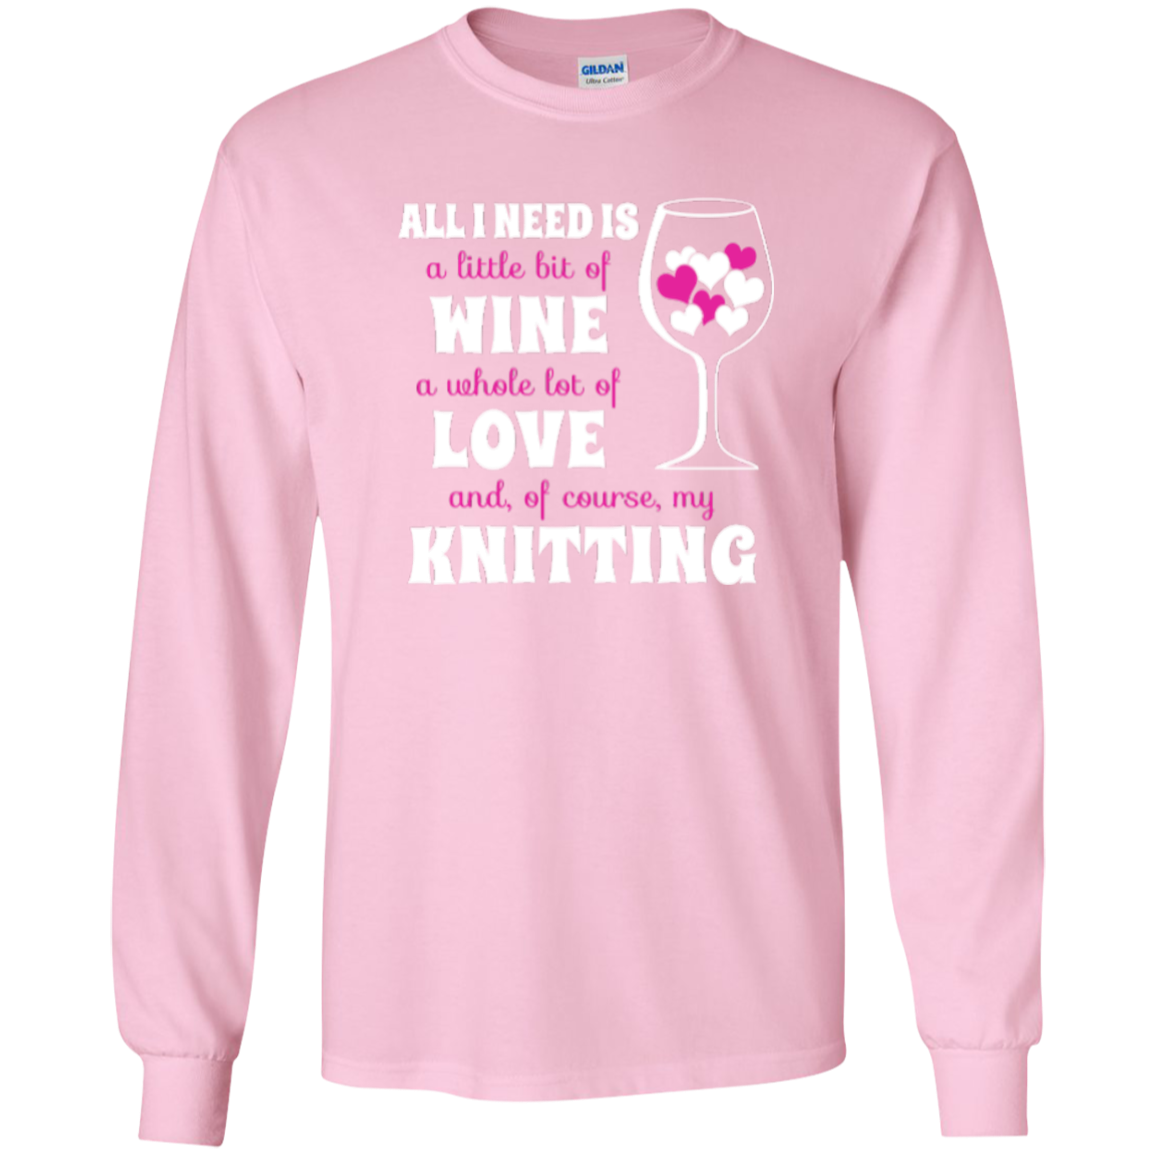 All I Need is Wine-Love-Knitting Long Sleeve Ultra Cotton Tshirt - Crafter4Life - 8